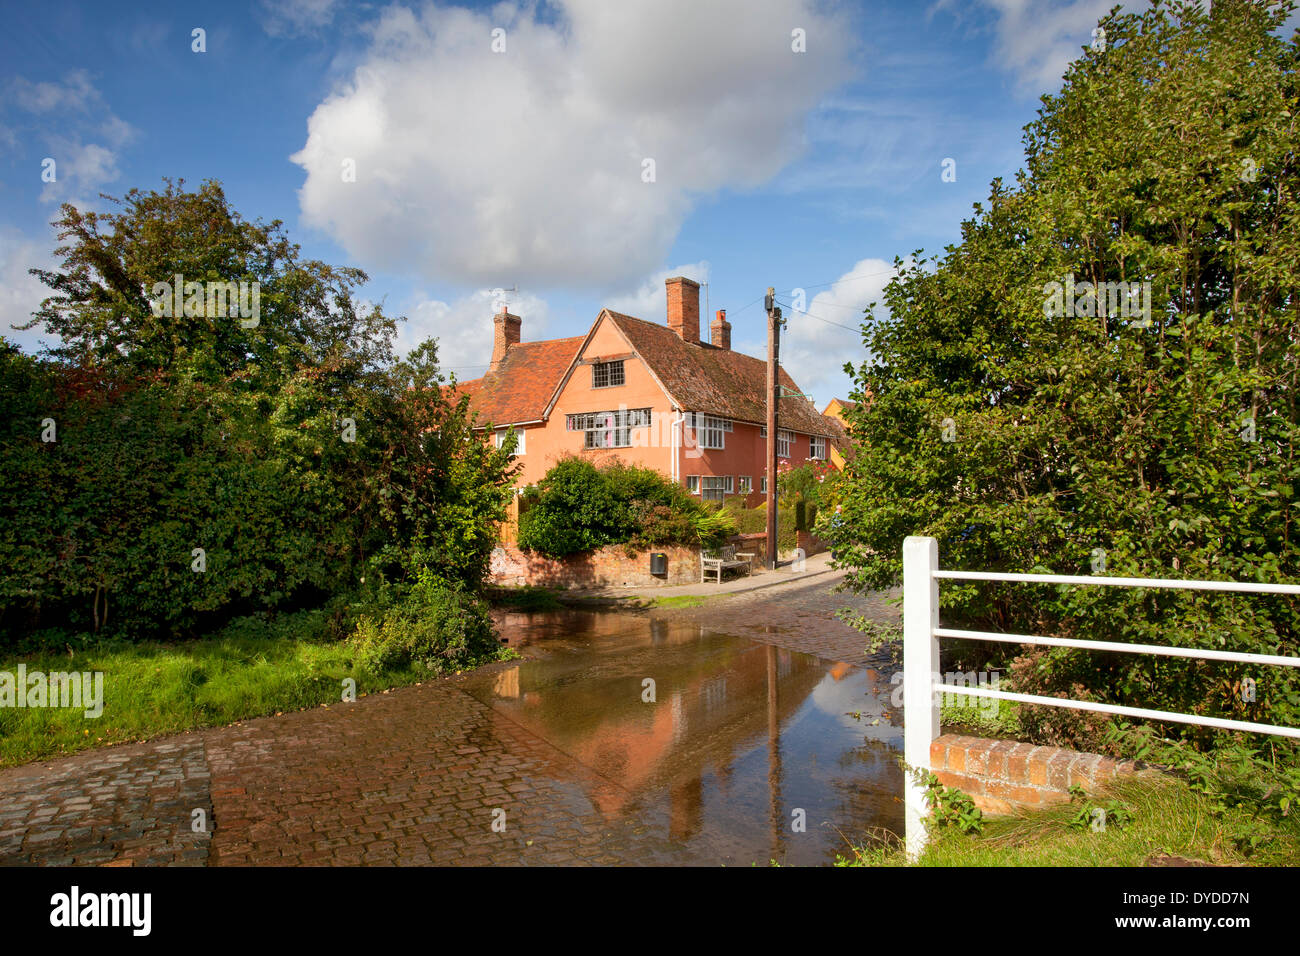 The picturesque village of Kersey in Suffolk. Stock Photo